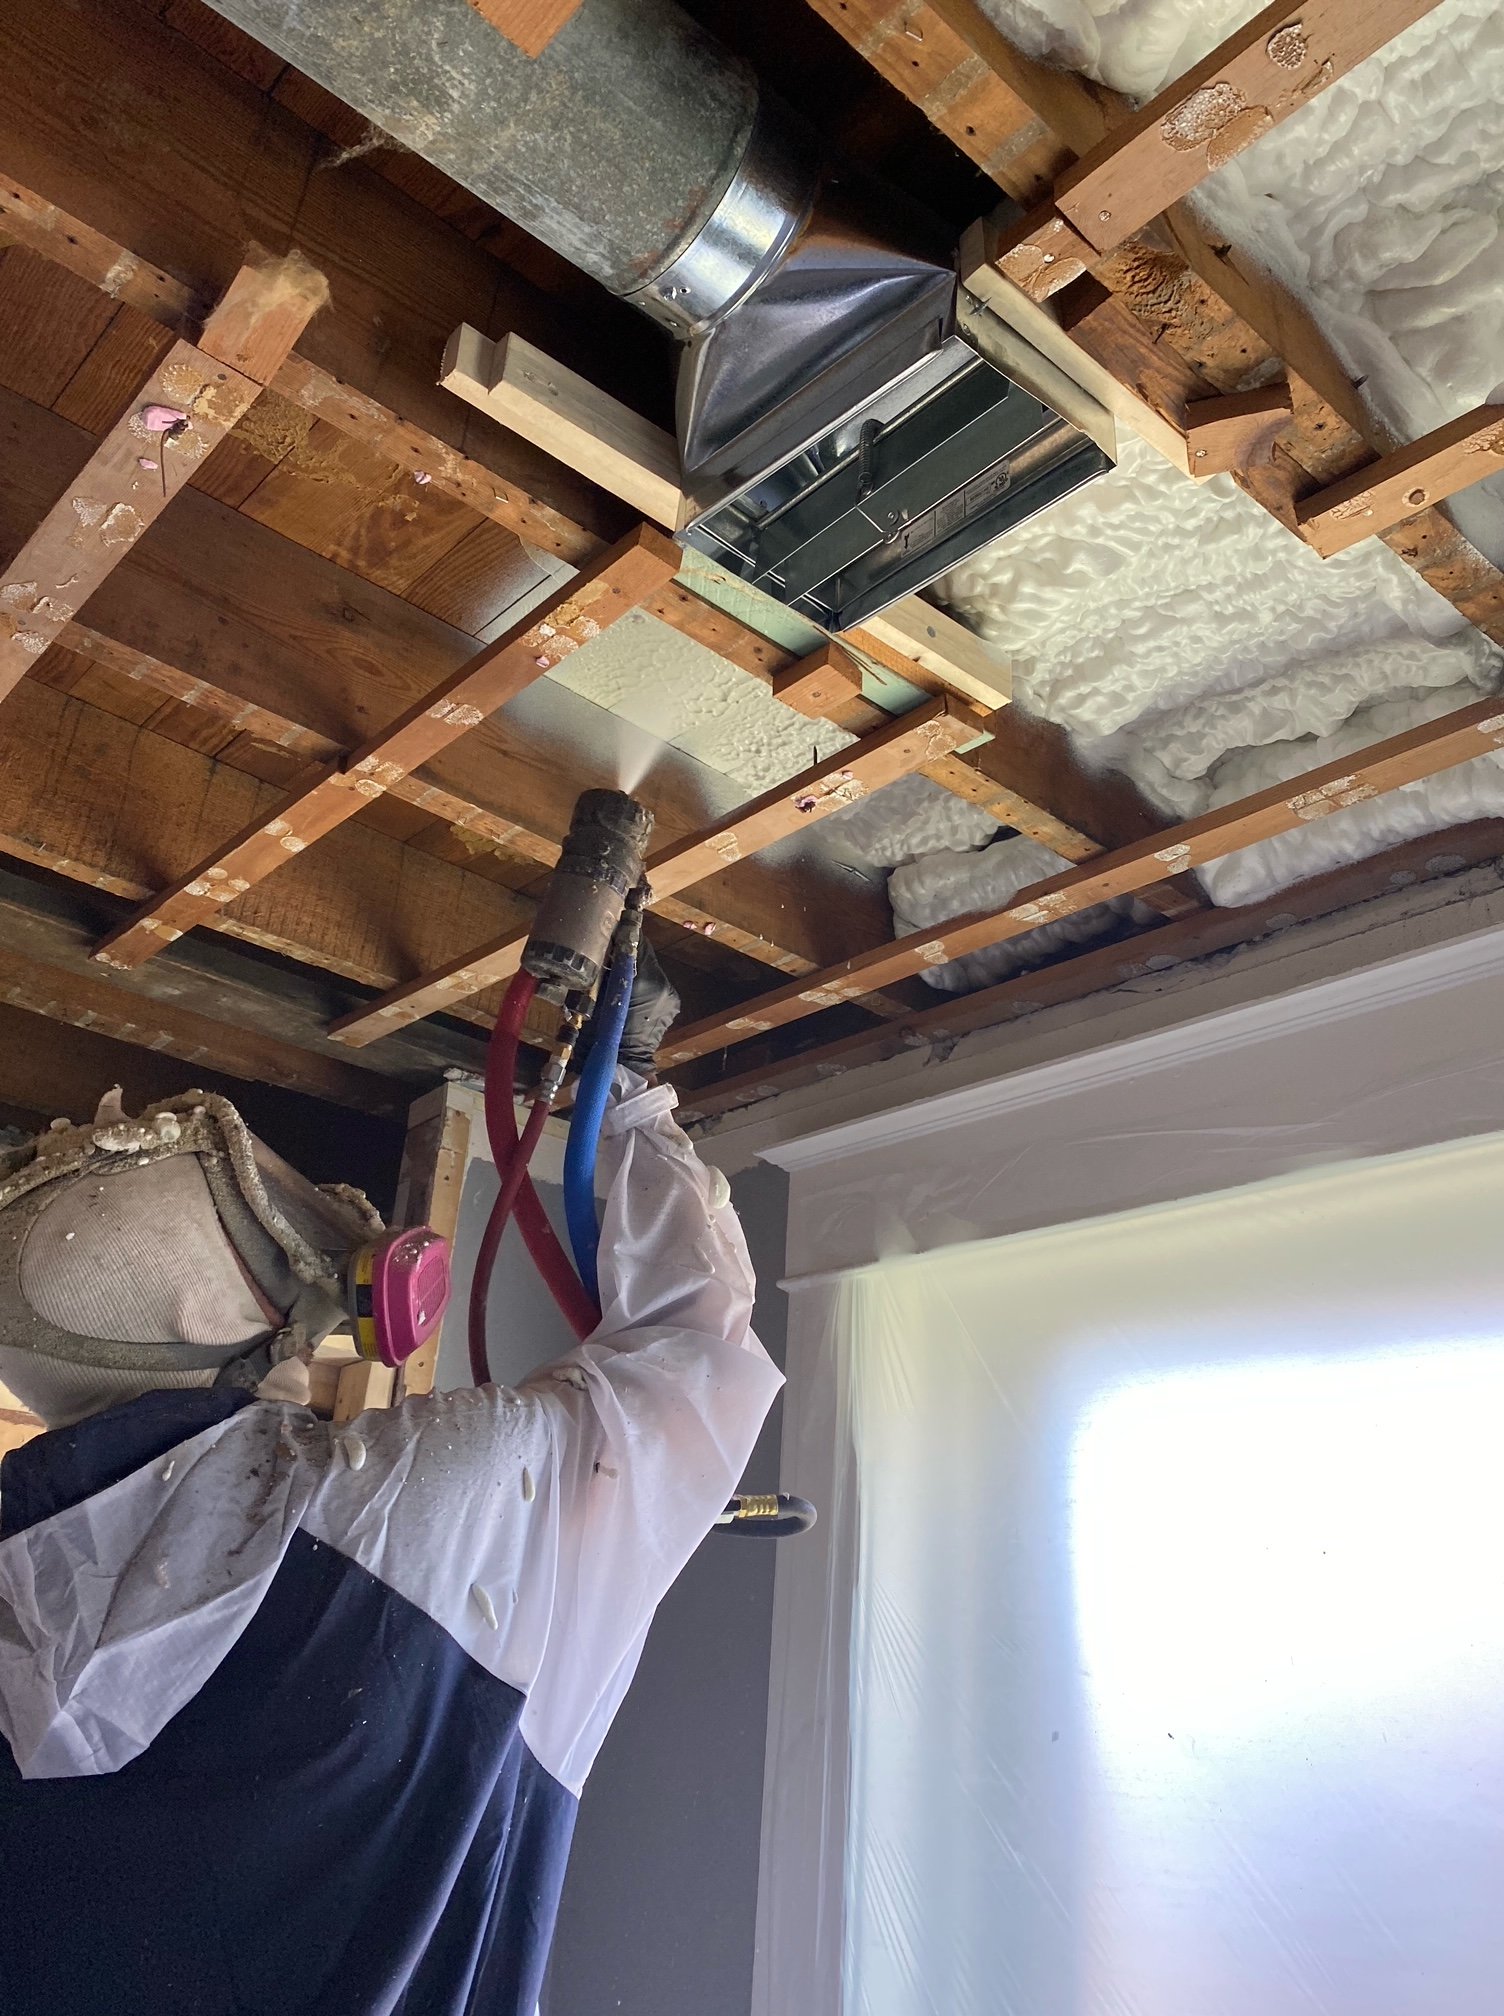 Spray foam insulation serves as an effective air barrier, sealing gaps and cracks to create an airtight seal in your home. Unlike traditional insulations, which may leave gaps susceptible to air infiltration, spray foam forms a seamless barrier that 